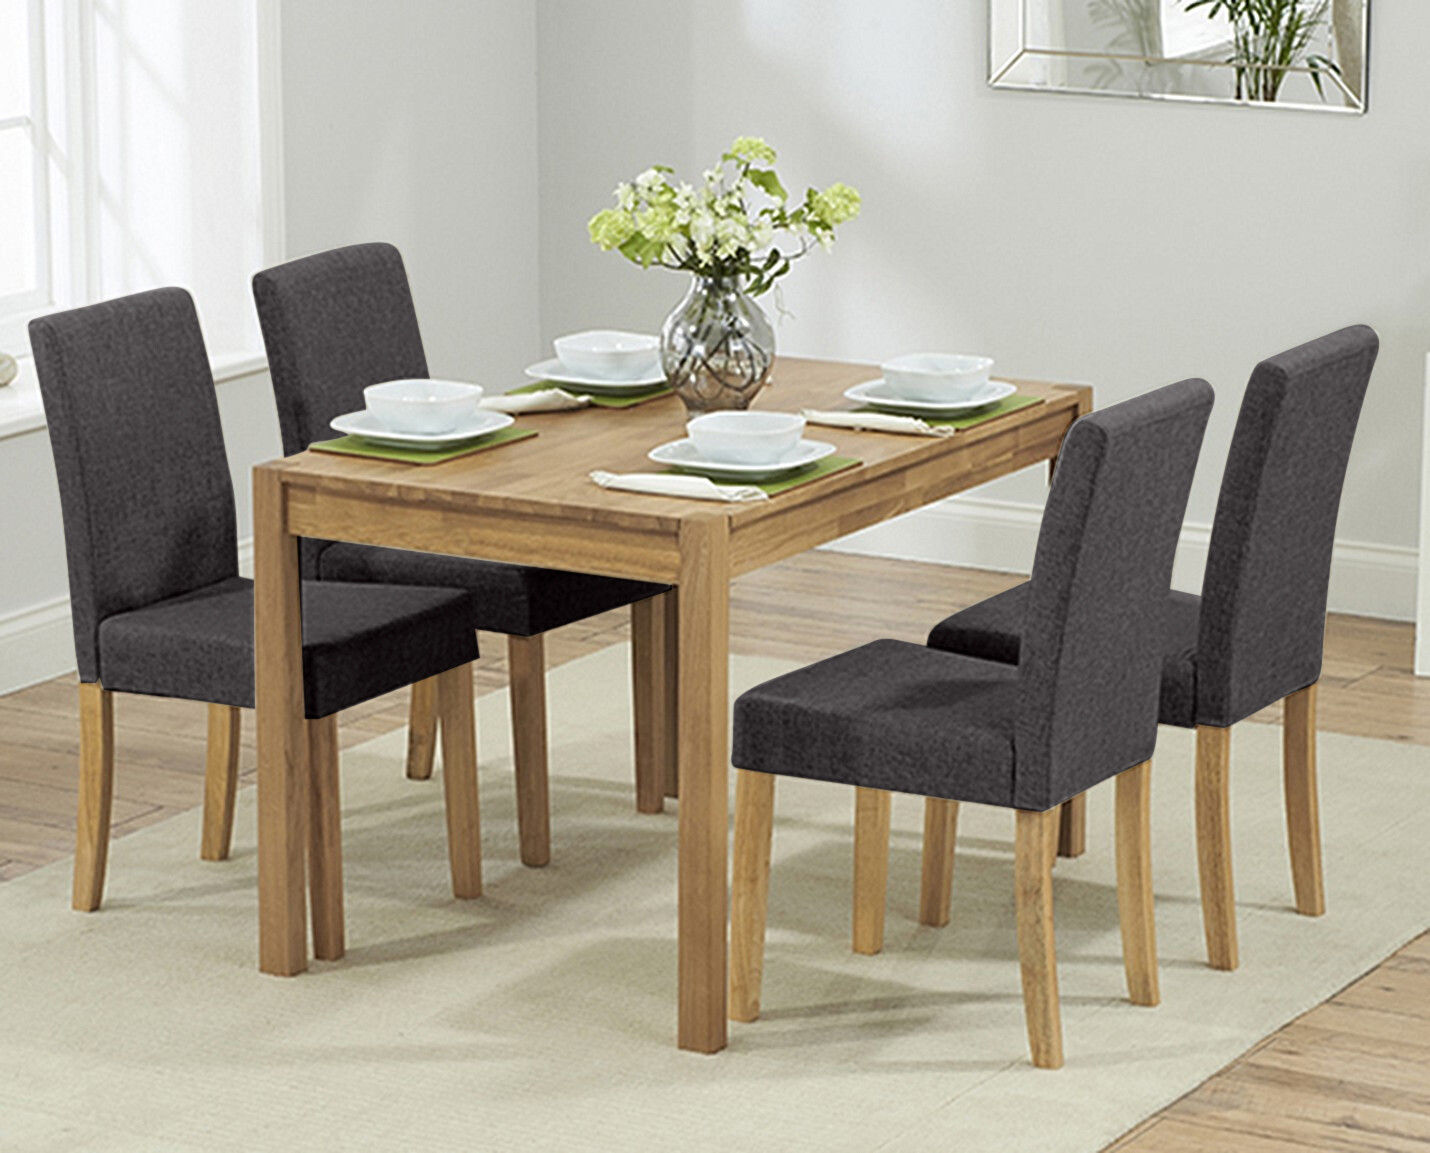 York 120cm Solid Oak Dining Table With 4 Charcoal Grey Lila Fabric Chairs